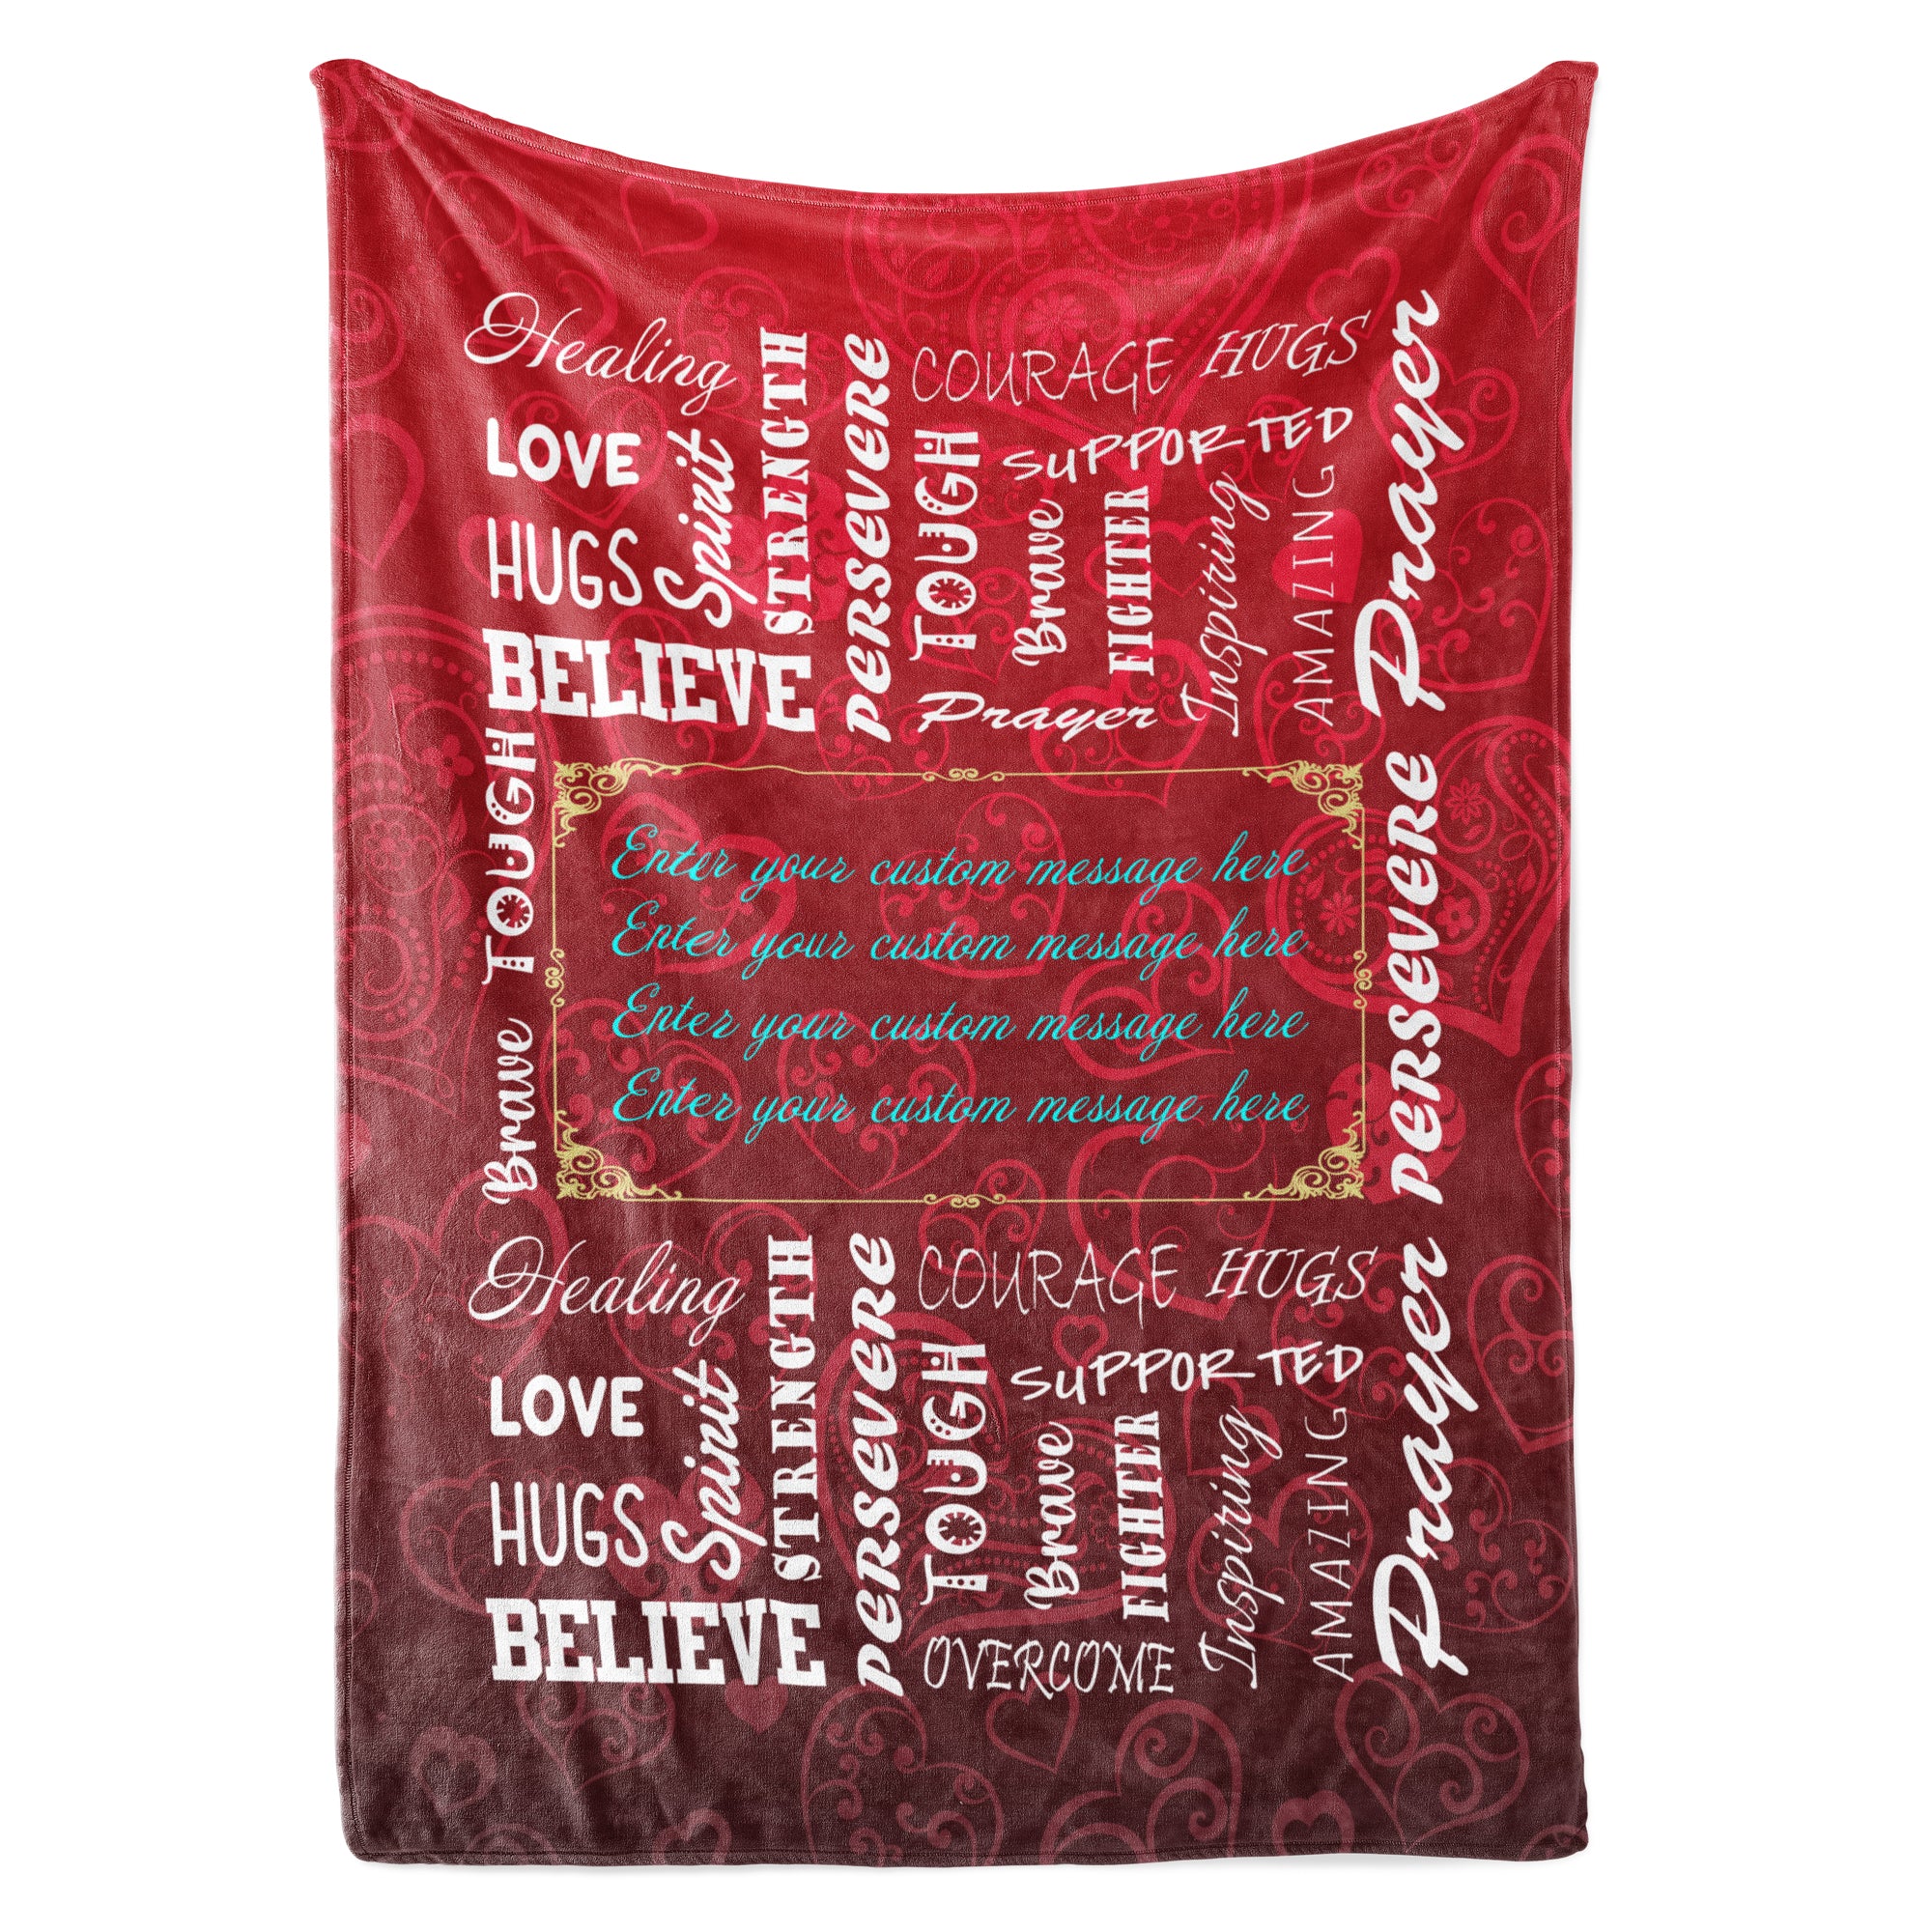 Personalized Note Blanket For Mom: Custom Message Gifts For Mom